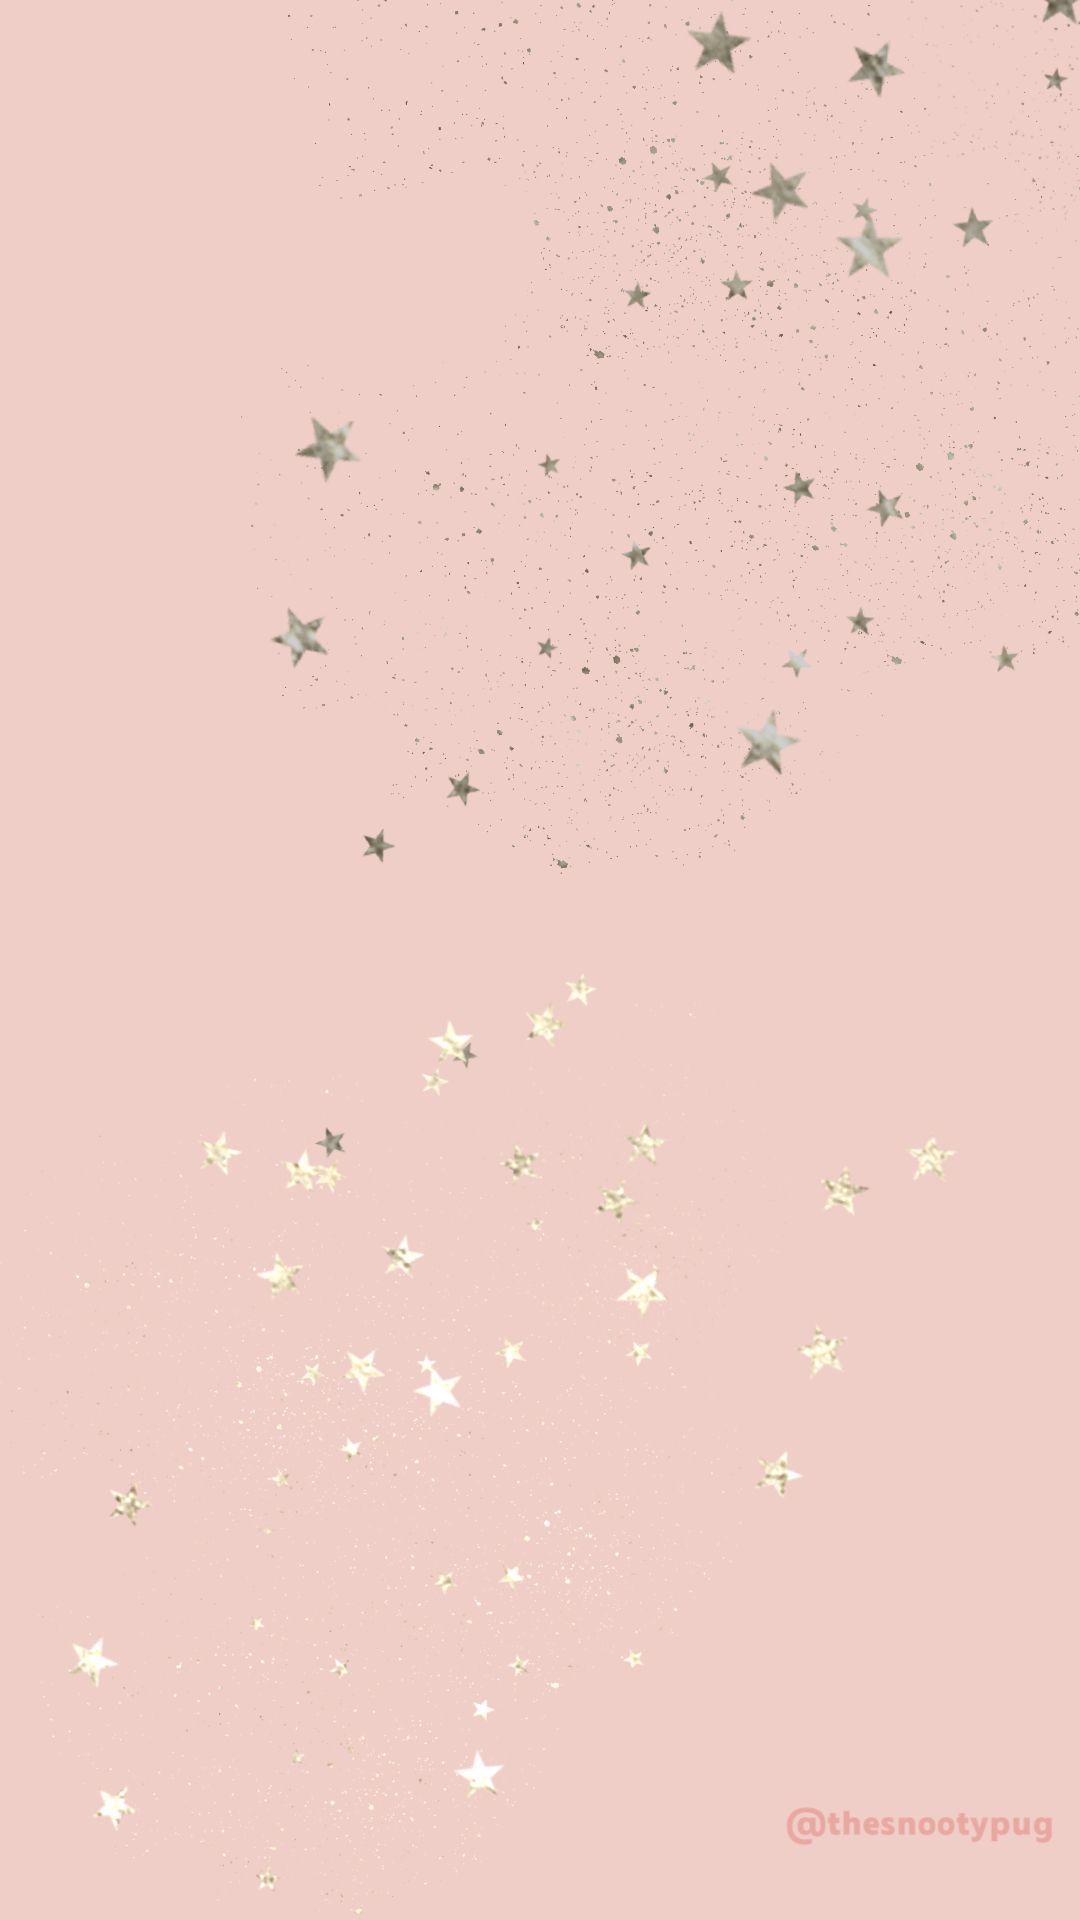 Rose Gold Pastel Aesthetic Wallpaper Factory Sale, 51% OFF